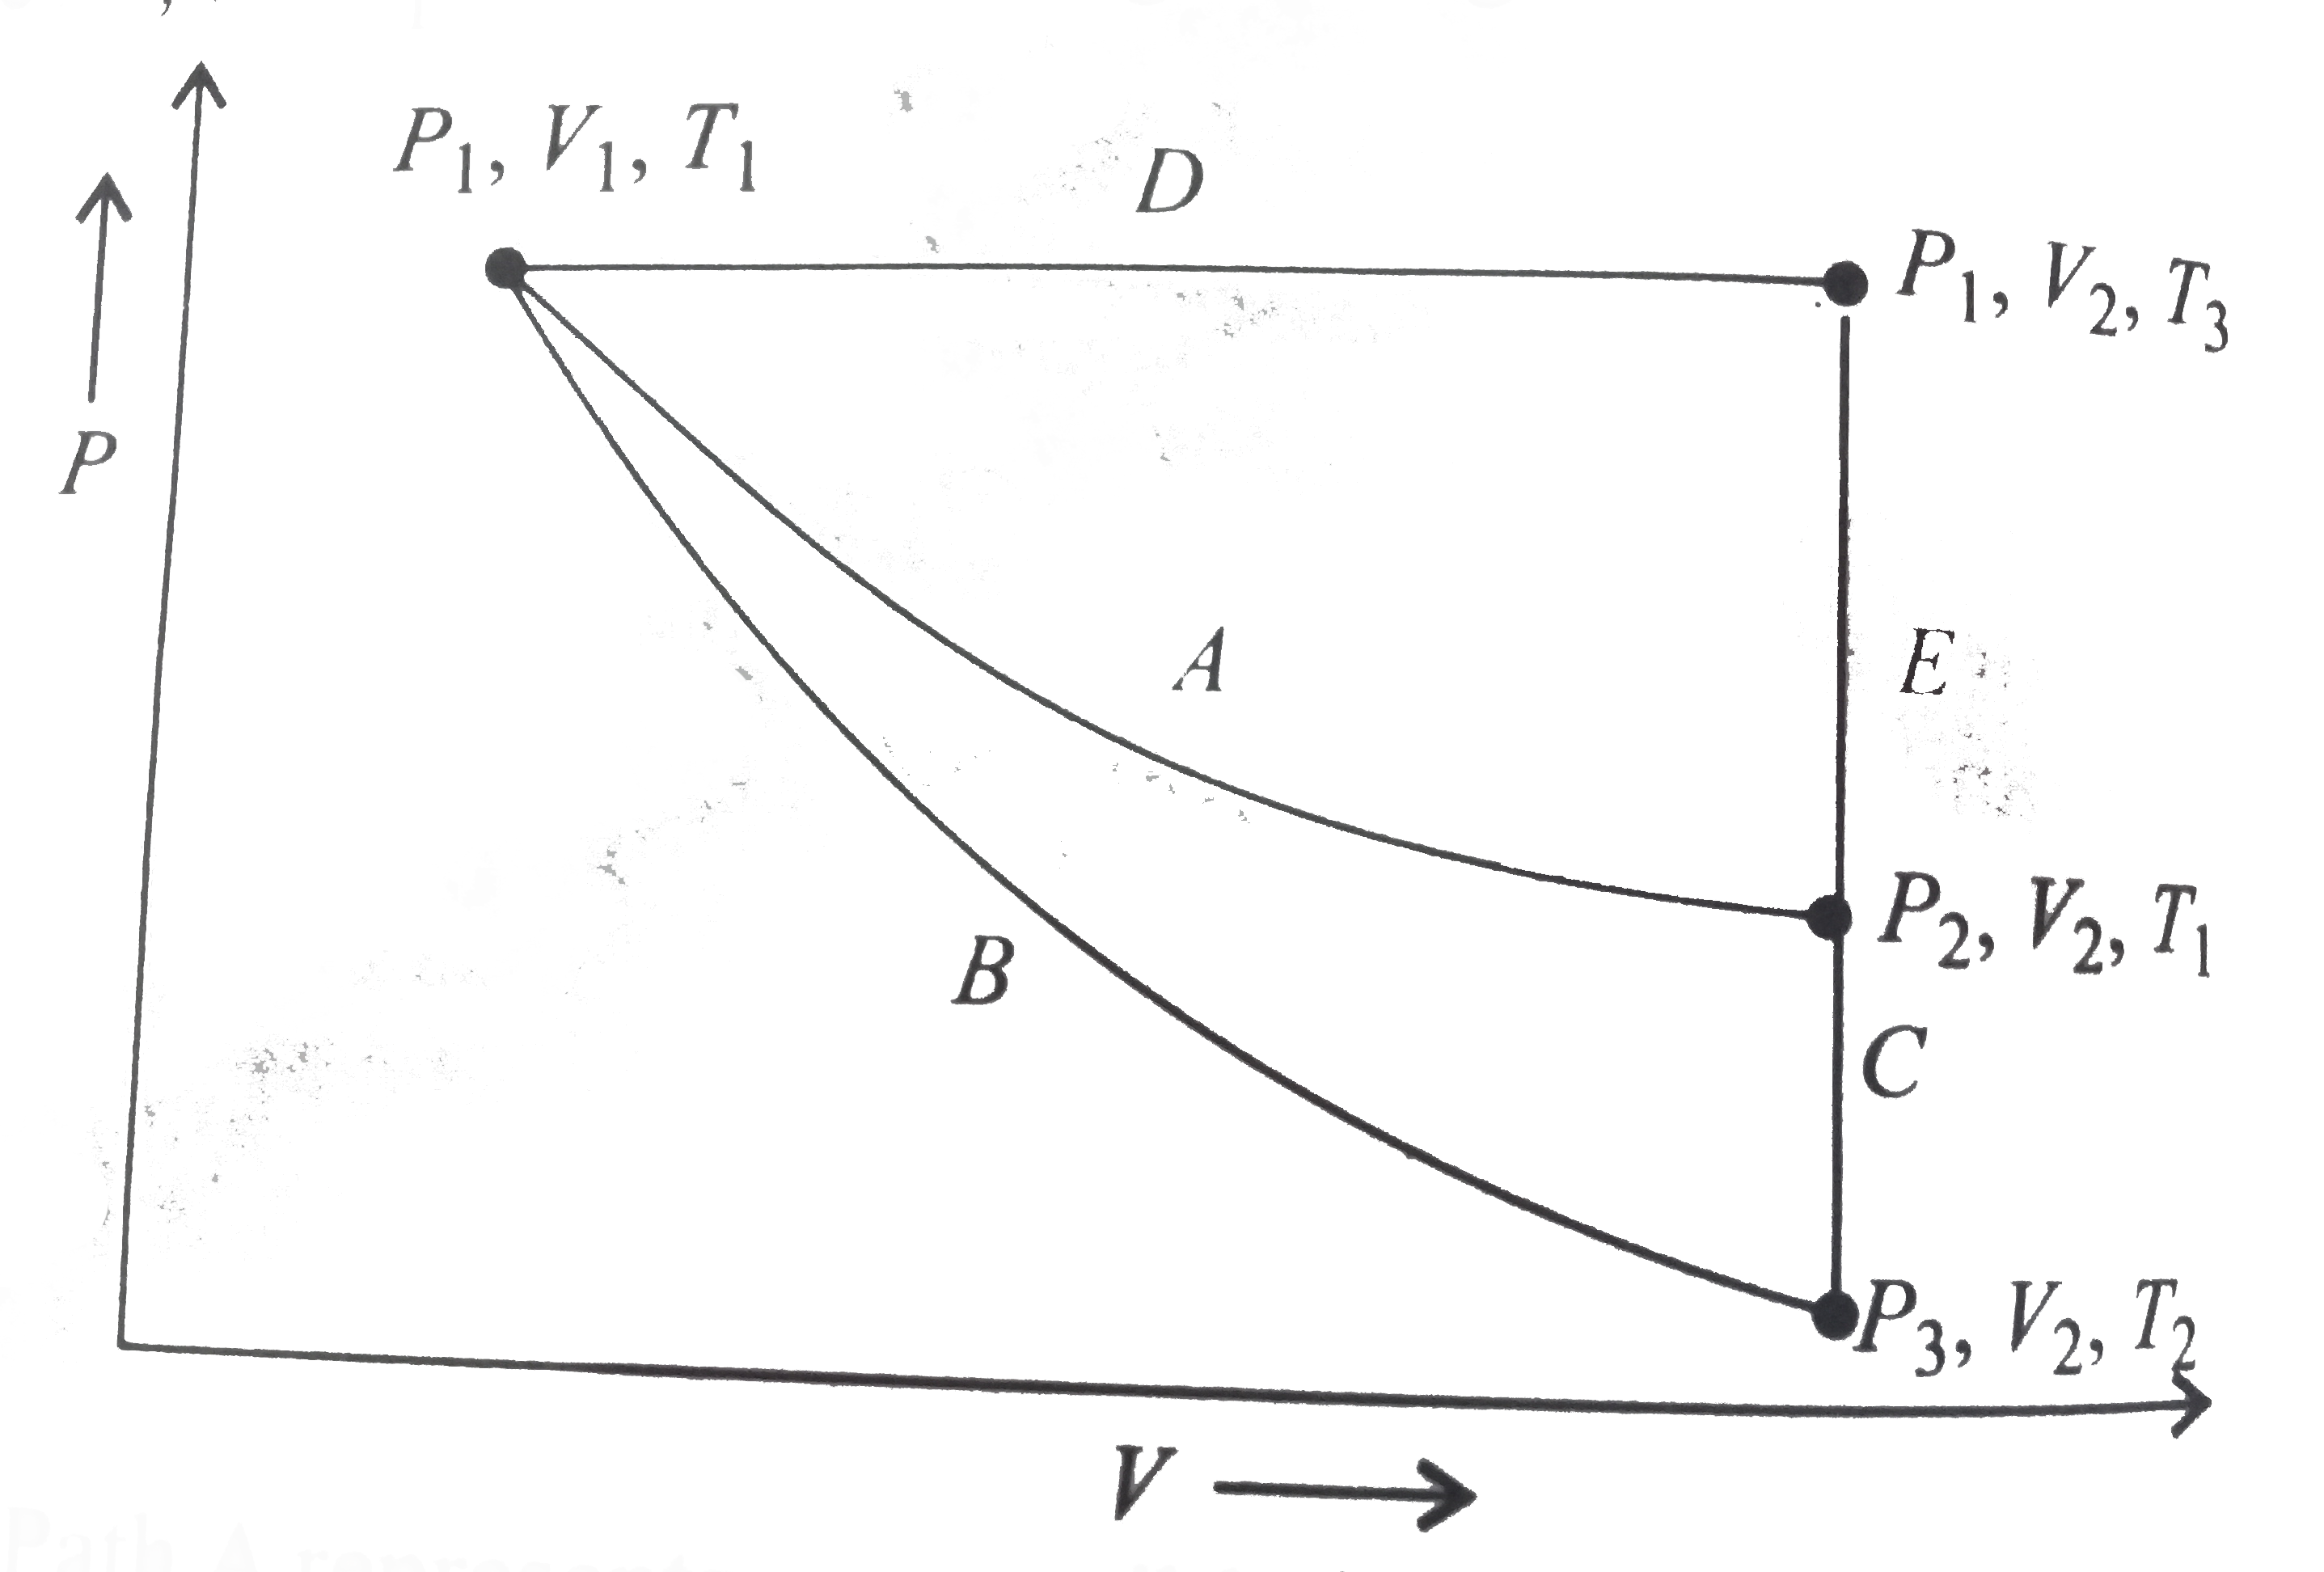 For an ideal gas, an illustration of three different paths A(B+C) and (D+E) from an initial state P(1), V(1), T(1) to a final state P(2), V(2),T(1) is shown in the given figure.      Path A represents a reversible isothermal expansion form P(1),V(1) to P(2),V(2), Path (B+C) represents a reversible adiabatic expansion (B) from P(1),V(1),T(1)to P(3),V(2),T(2) followed by reversible heating the gas at constant volume (C)from P(3),V(2),T(2) to P(2),V(2),T(1). Path (D+E) represents a reversible expansion at constant pressure P(1)(D) from P(1),V(1),T(1) to P(1),V(2),T(3) followed  by a reversible cooling at constant volume V(2)(E) from P(1),V(2),T(3) to P(2),V(2),T(1).   What is DeltaS for path A?